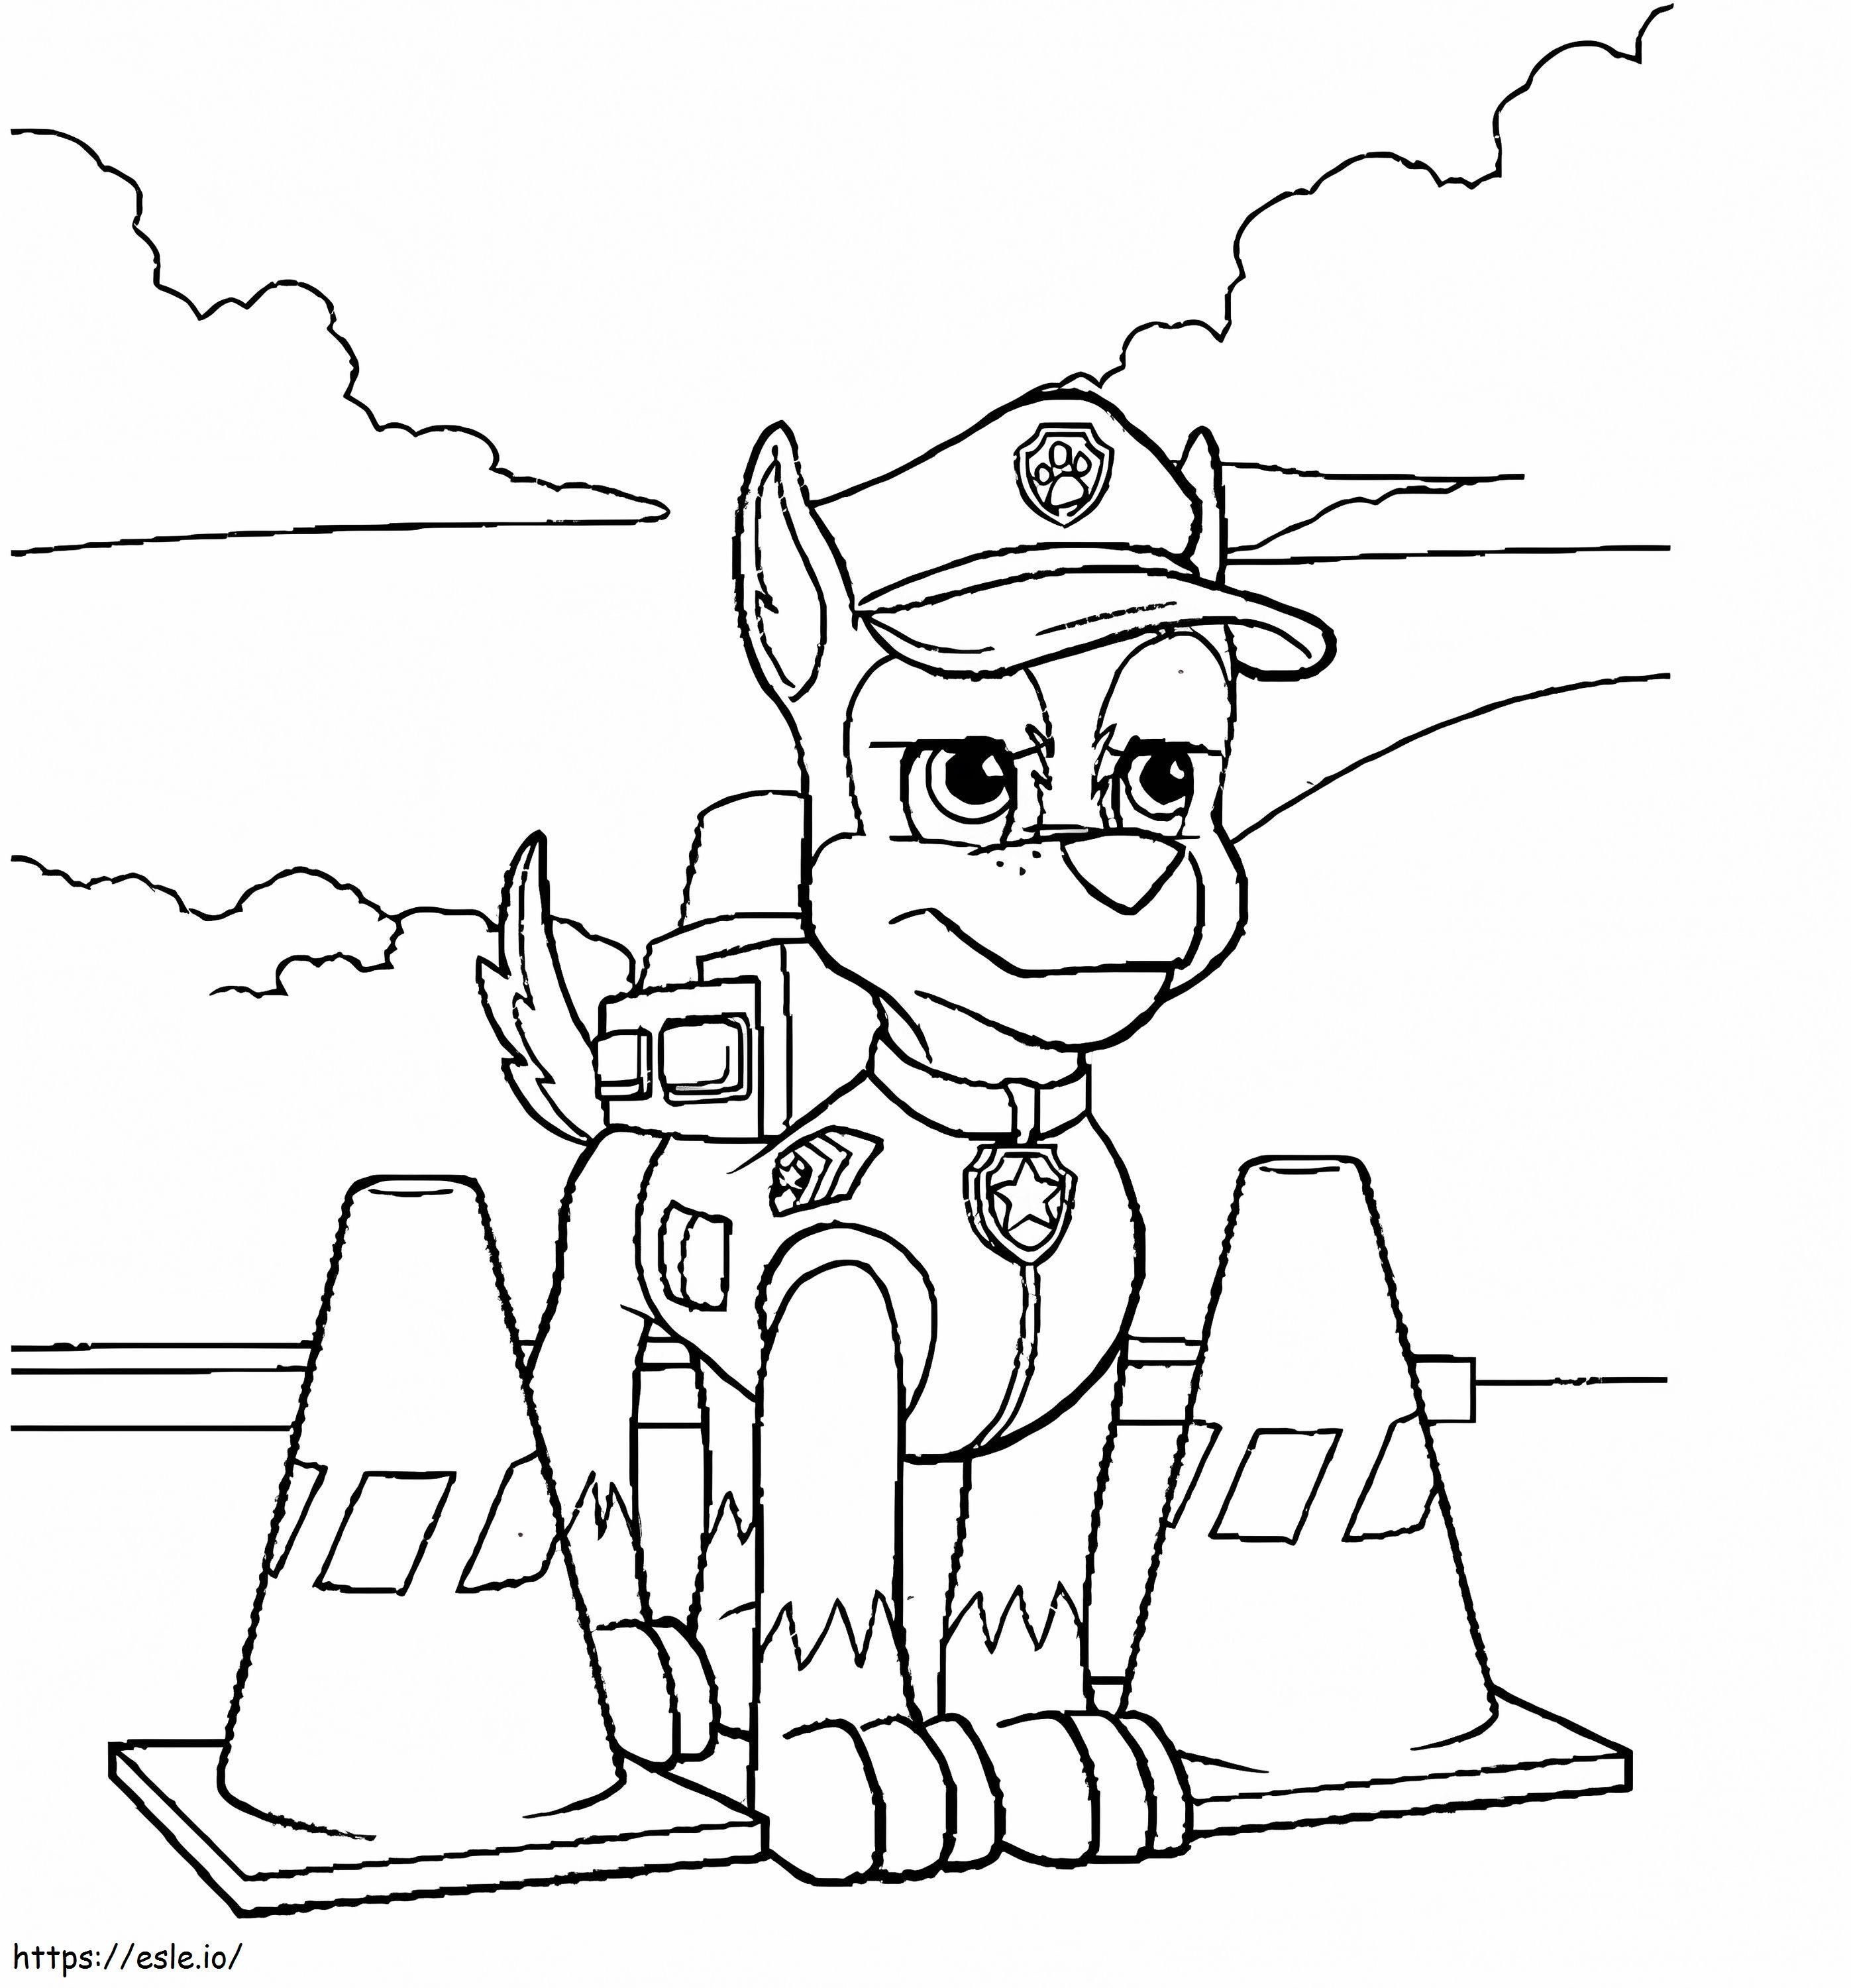 Chase Paw Patrol 31 coloring page